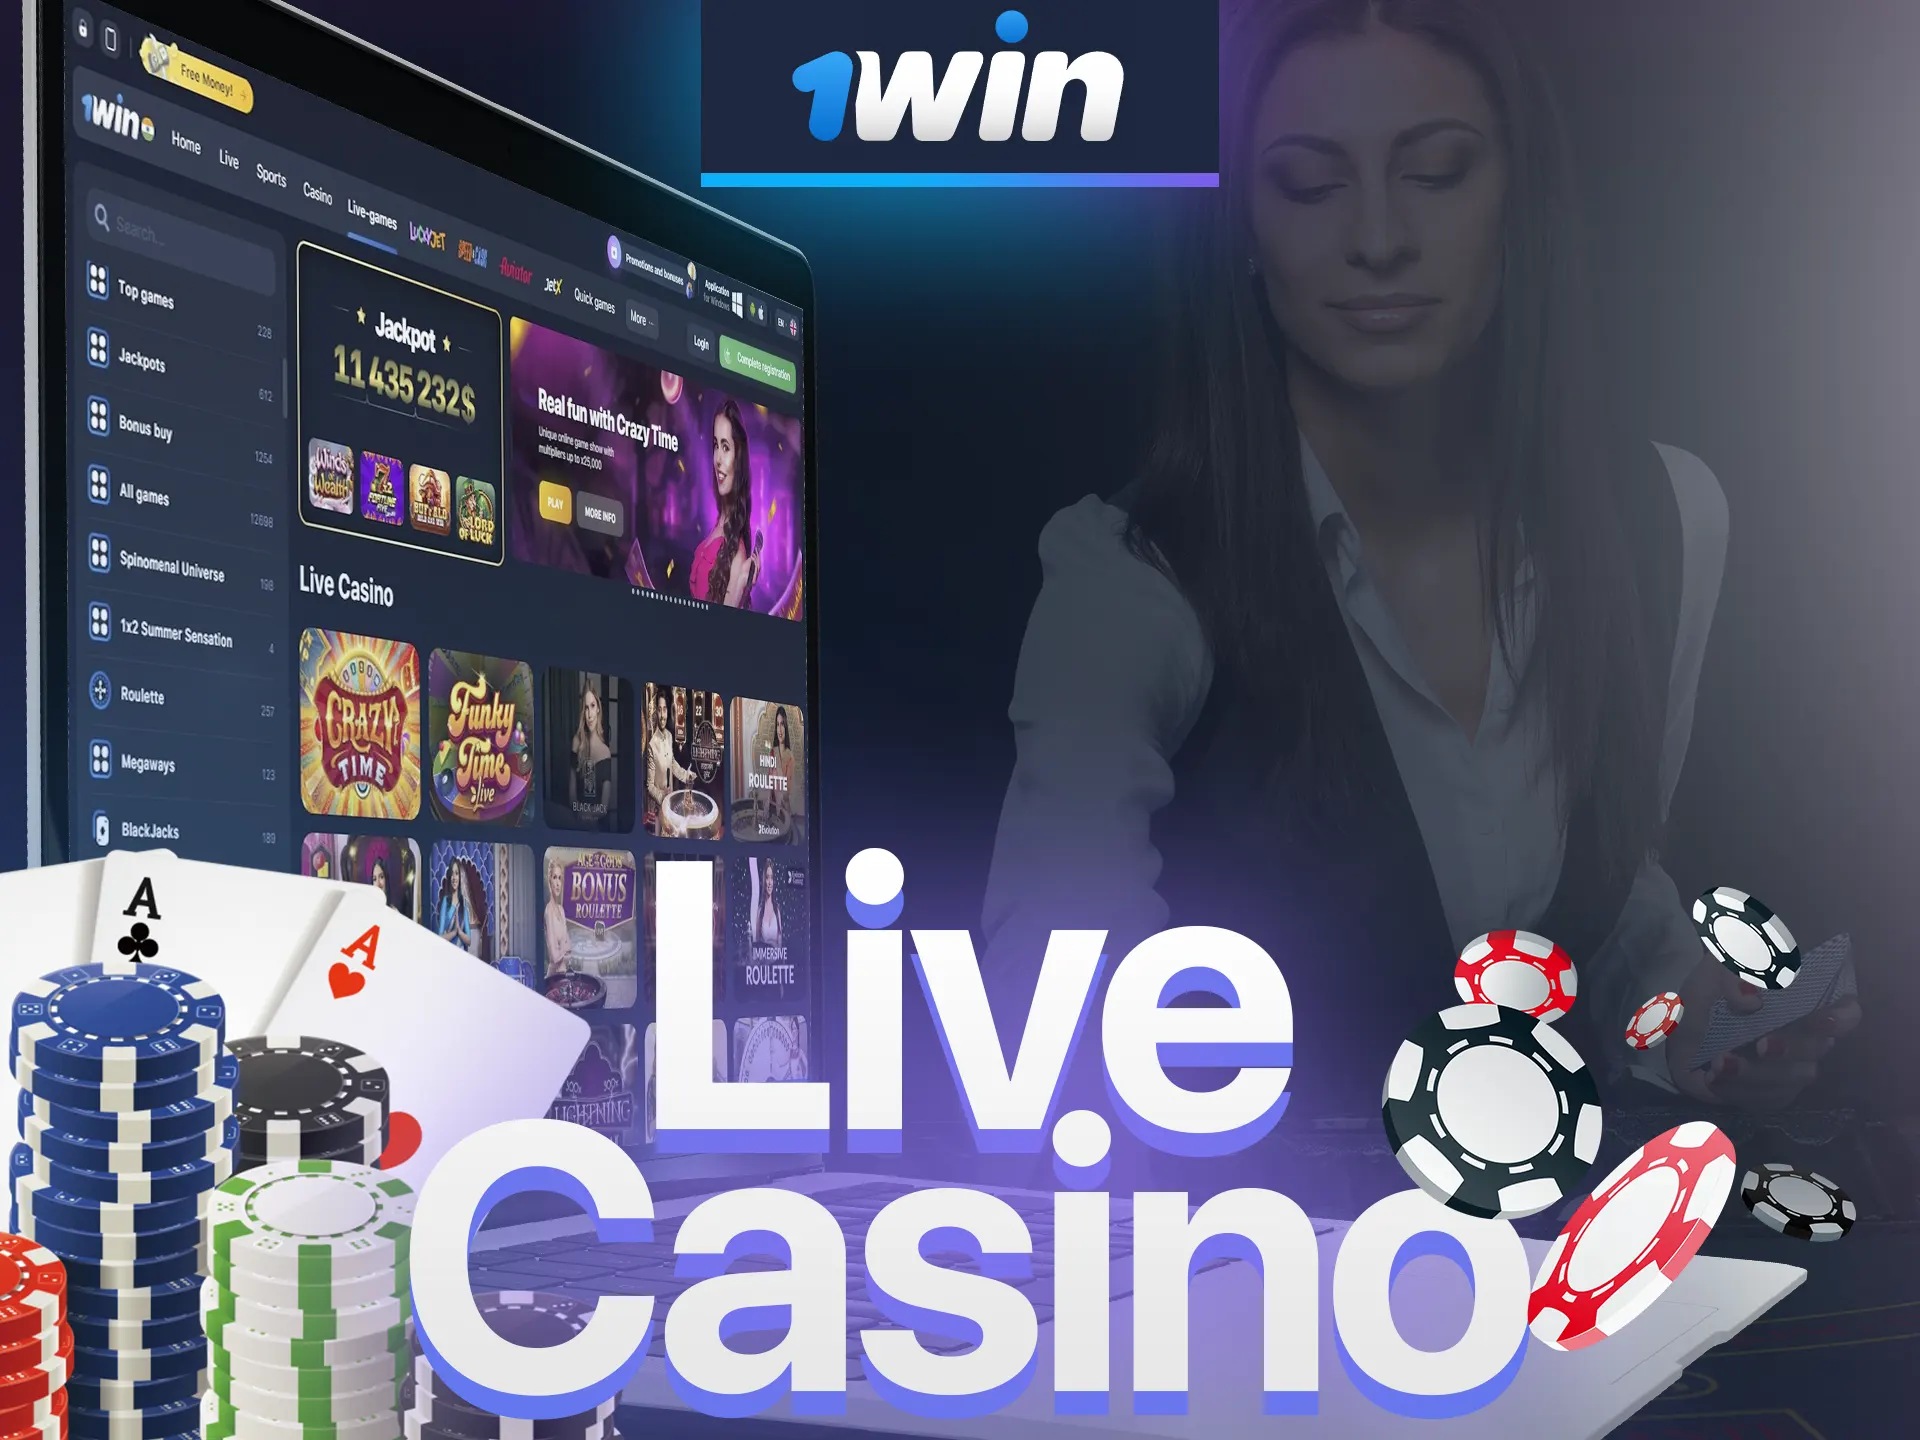 In the Live Casino section of the 1win website, players can interact with live dealers in real-time.